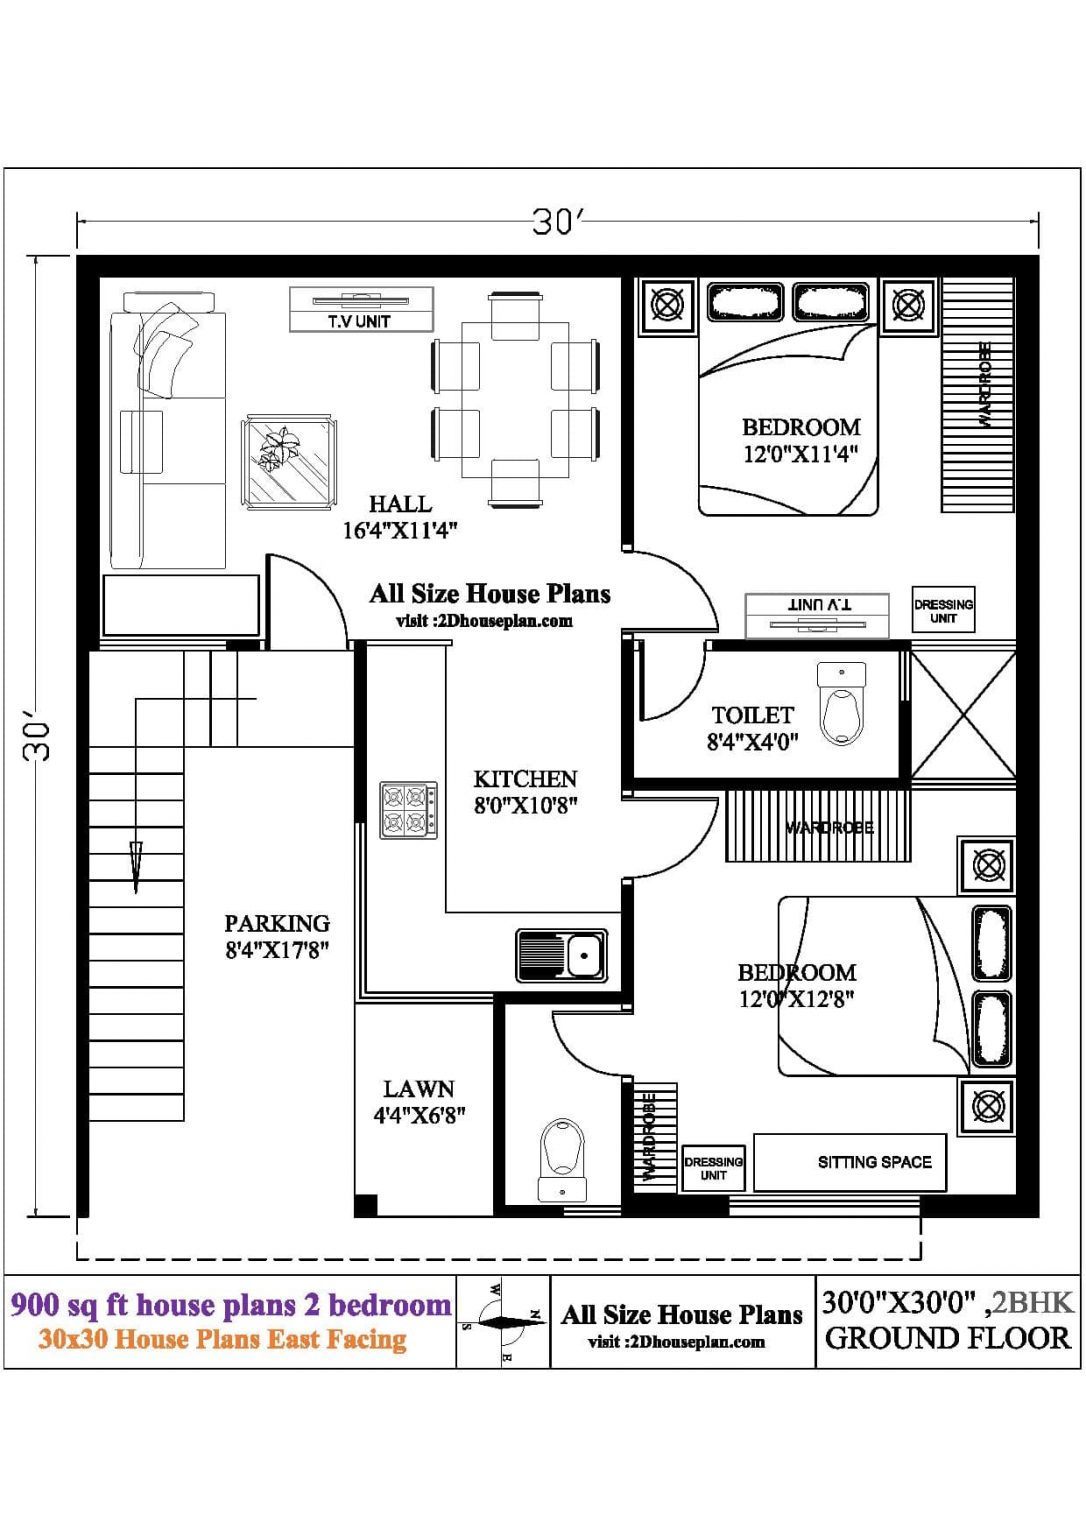 30x30 house plan | 30 * 30 house plan with car parking | 2bhk house plan